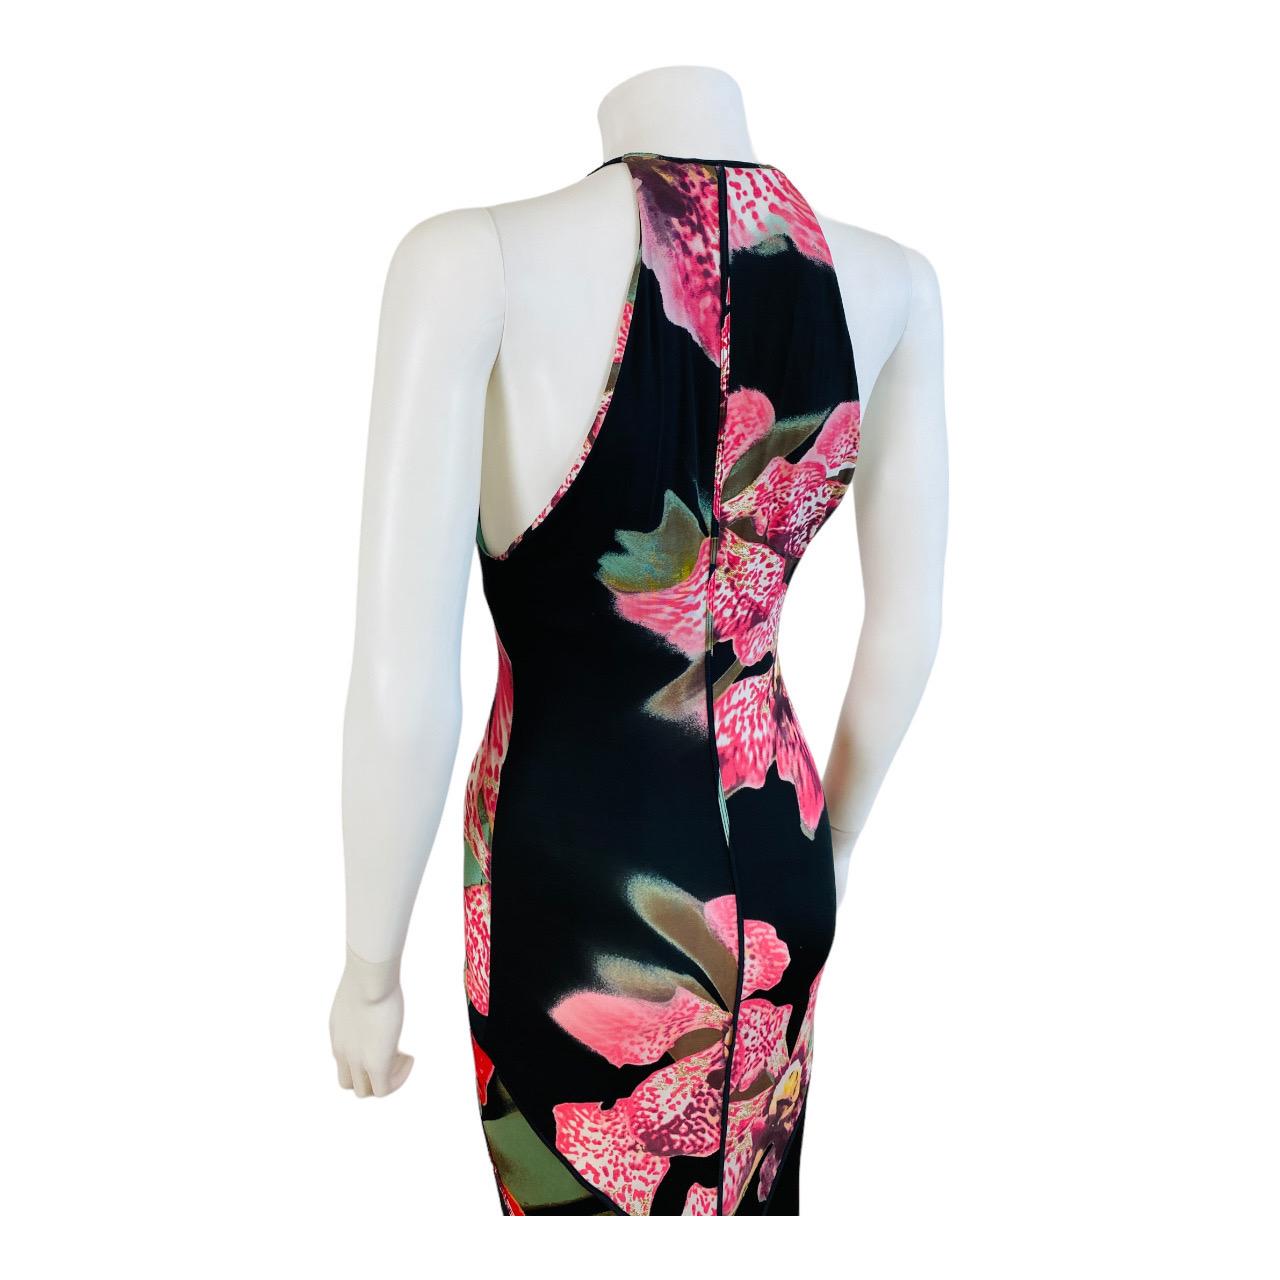 Vintage Roberto Cavalli F/W 2004 Floral Orchid Print Pink + Black Dress Gown For Sale 6